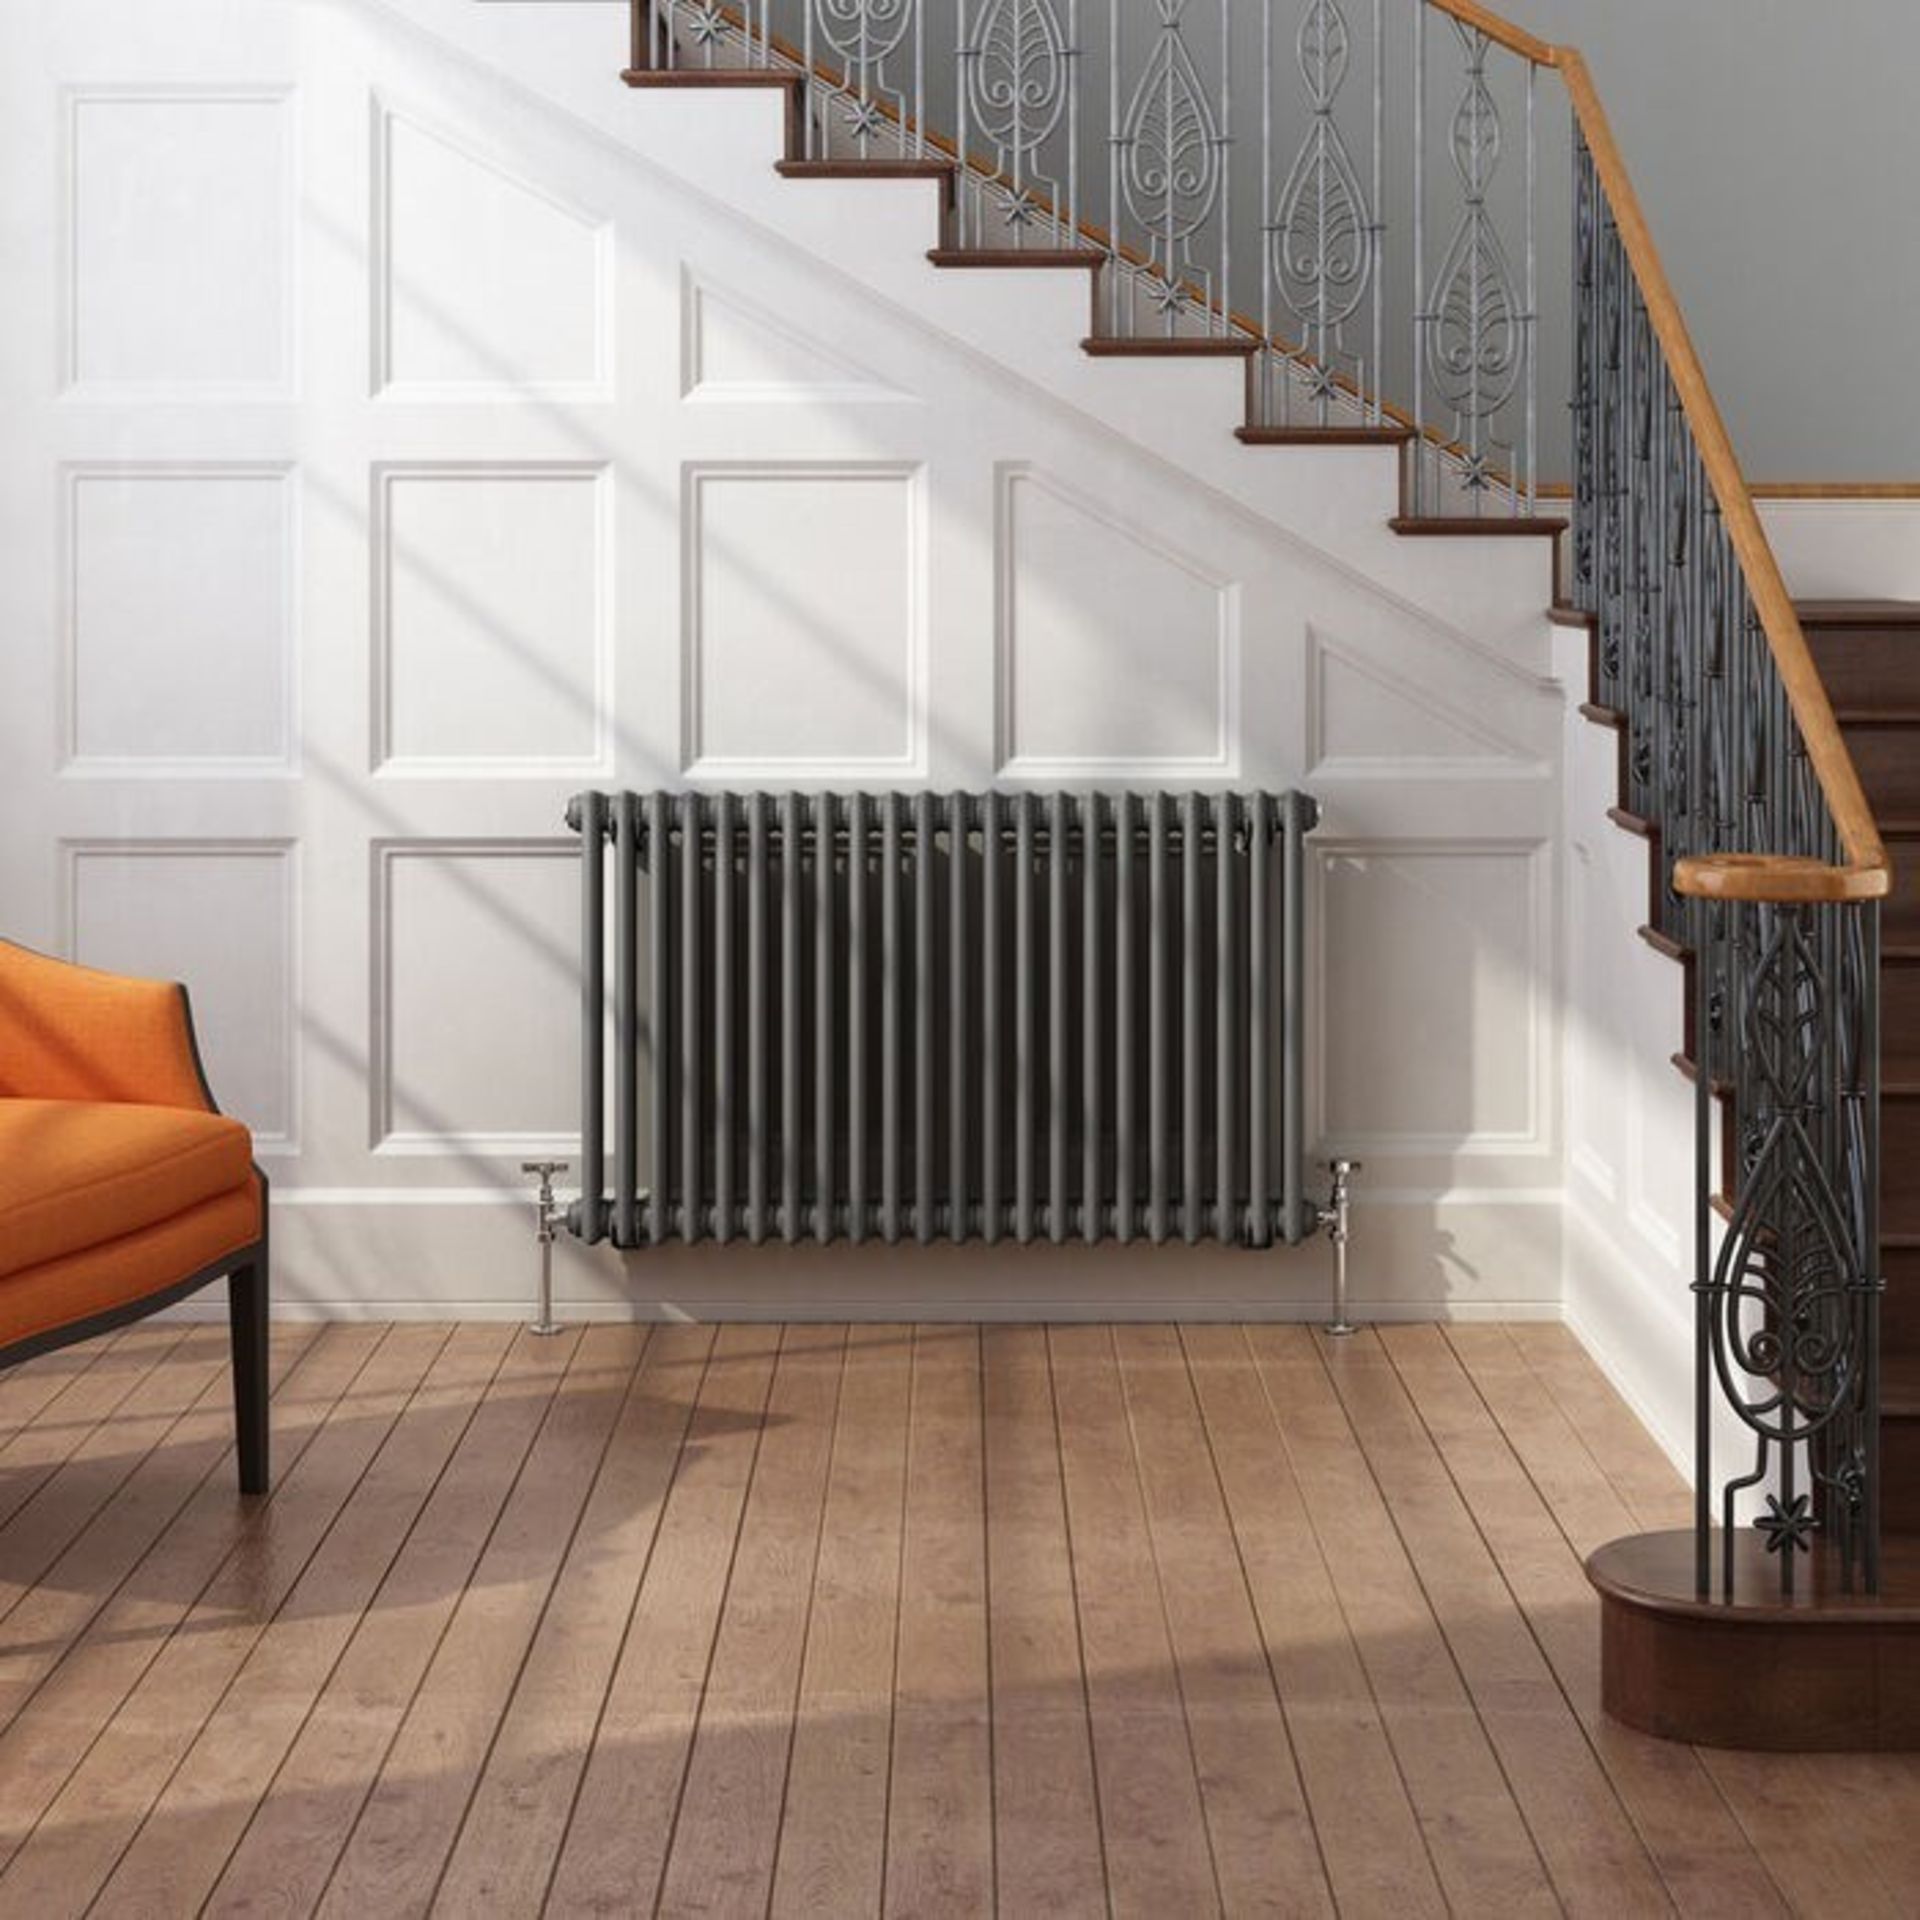 600x1008mm Anthracite Double Panel Horizontal Colosseum Traditional Radiator. RRP £549.99.RCA... - Image 2 of 2